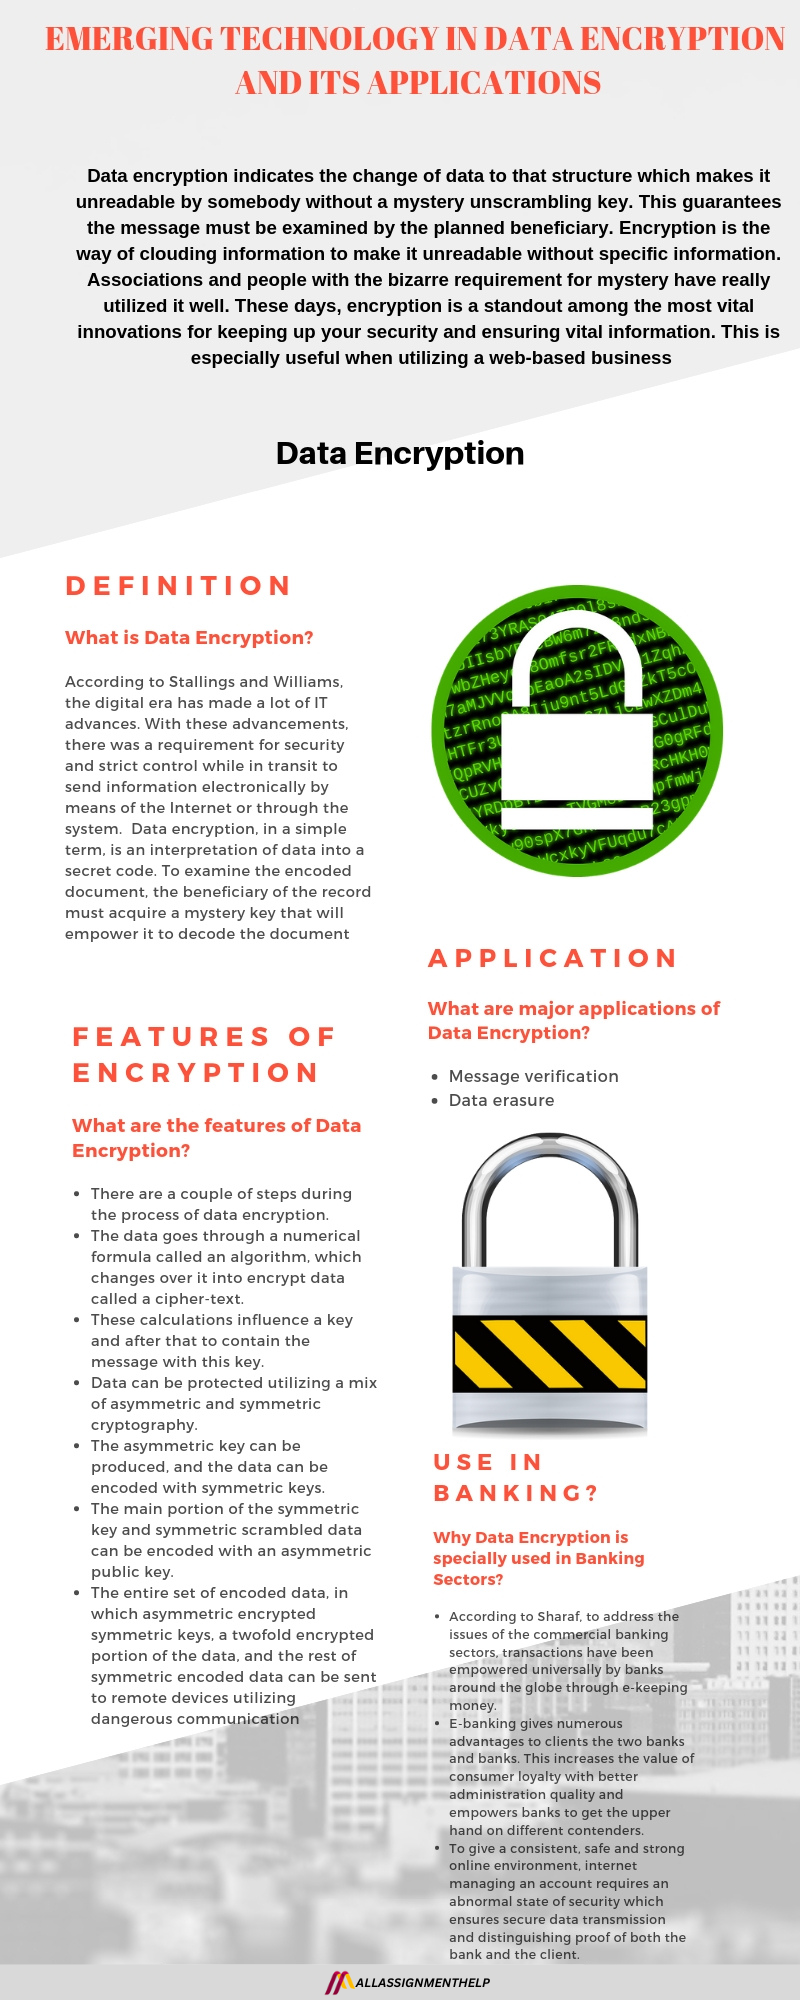 Data-encryption-and-its-applications-.png
